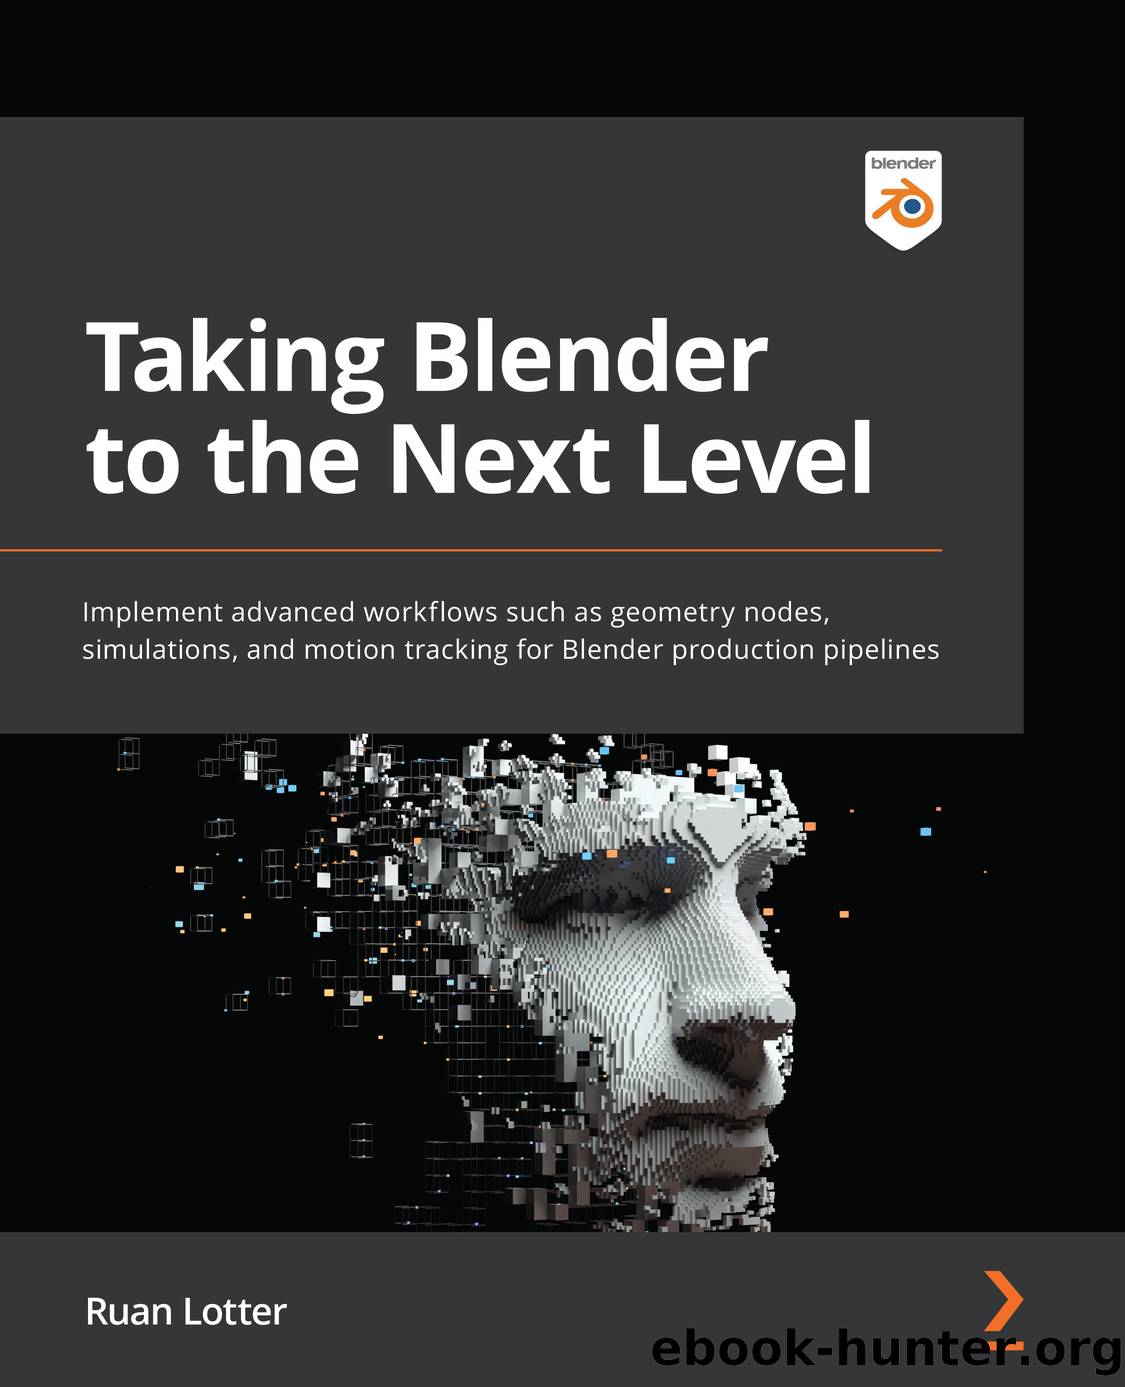 Taking Blender to the Next Level by Ruan Lotter